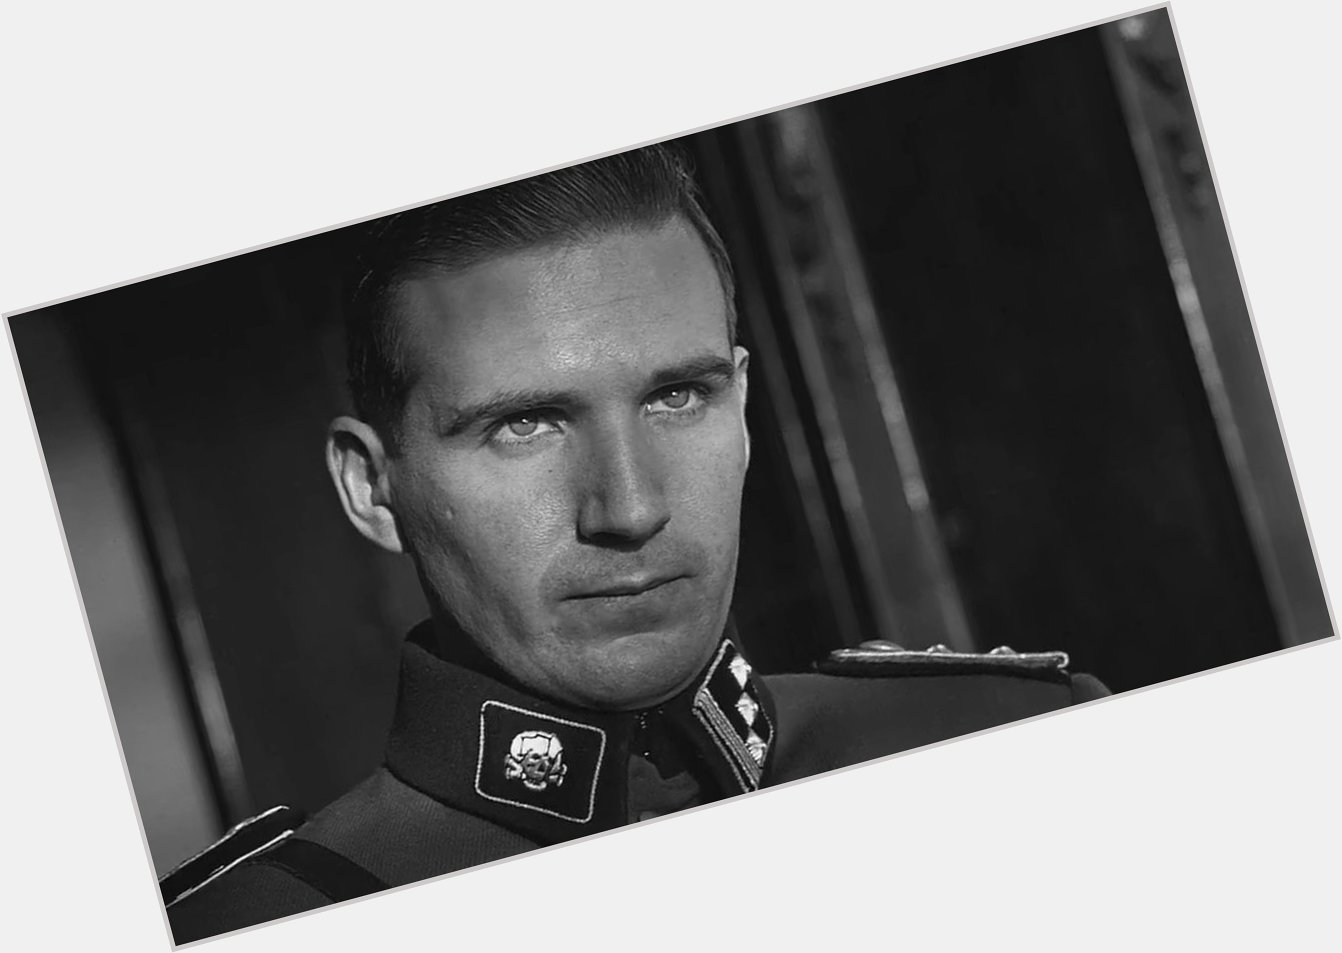 Happy birthday to Ralph Fiennes! The actor, producer and director turns 59 today. 